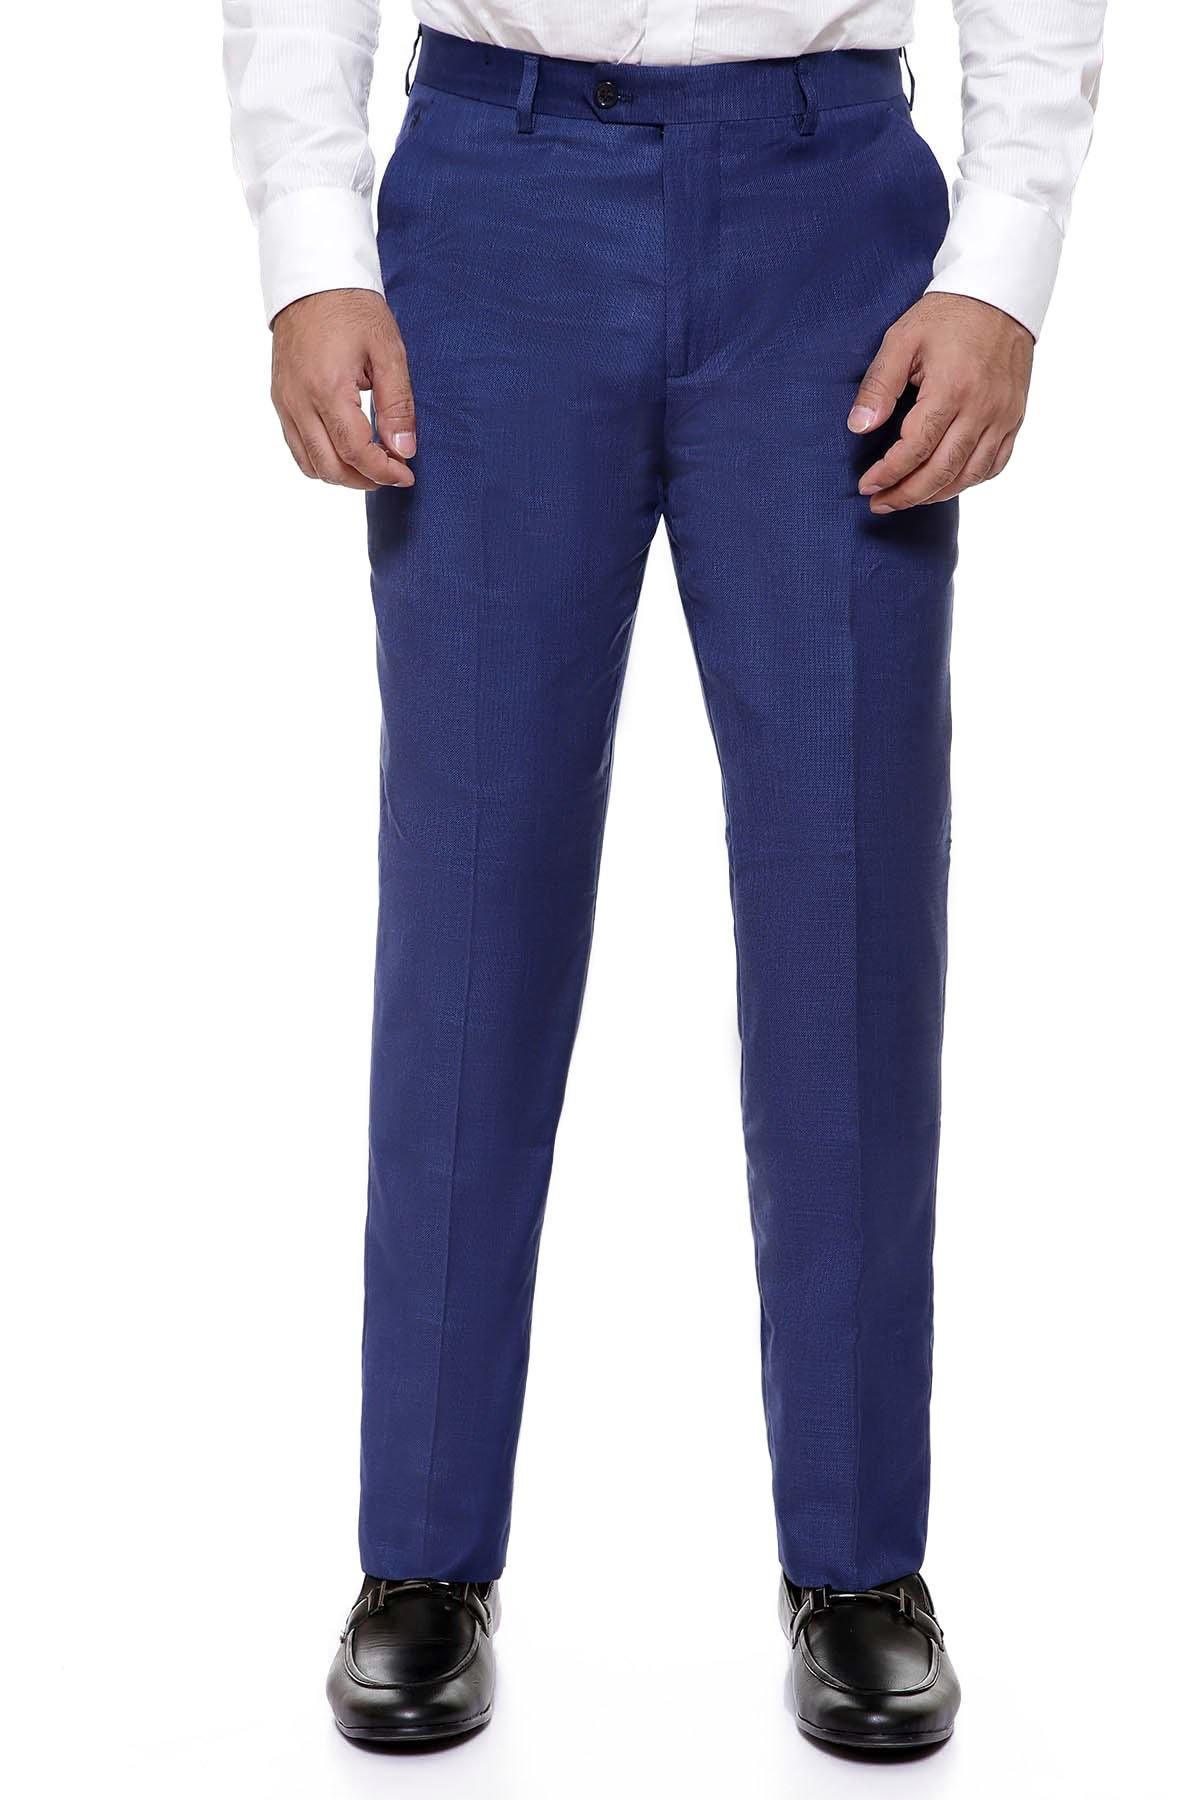 Dress Pant Smart fit Blue at Charcoal Clothing